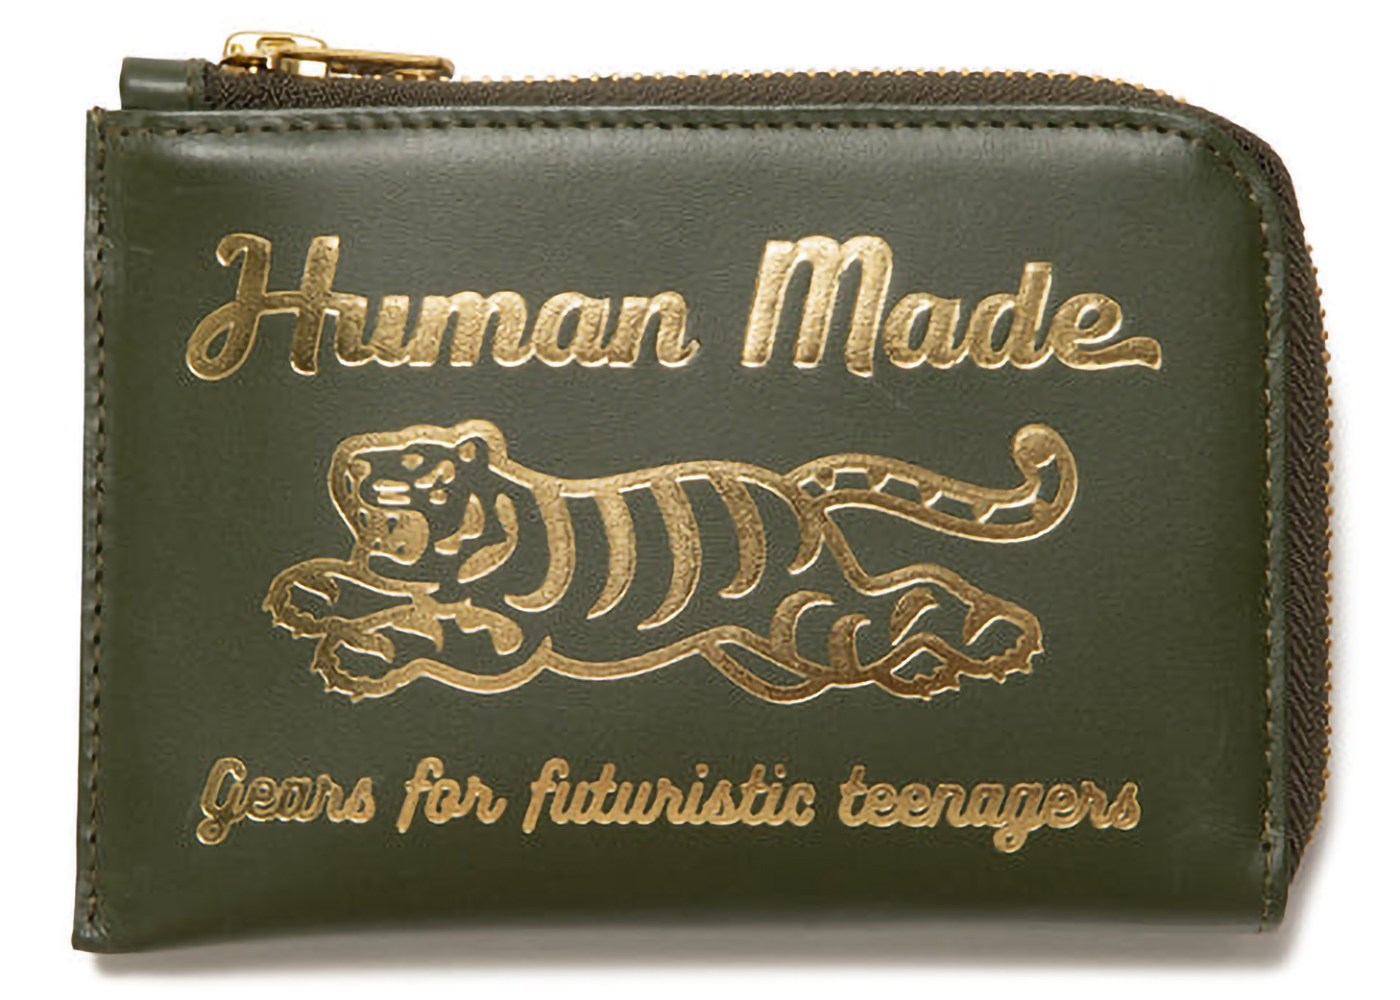 Human Made Tiger Leather Wallet Olive Drab - FW22 - US